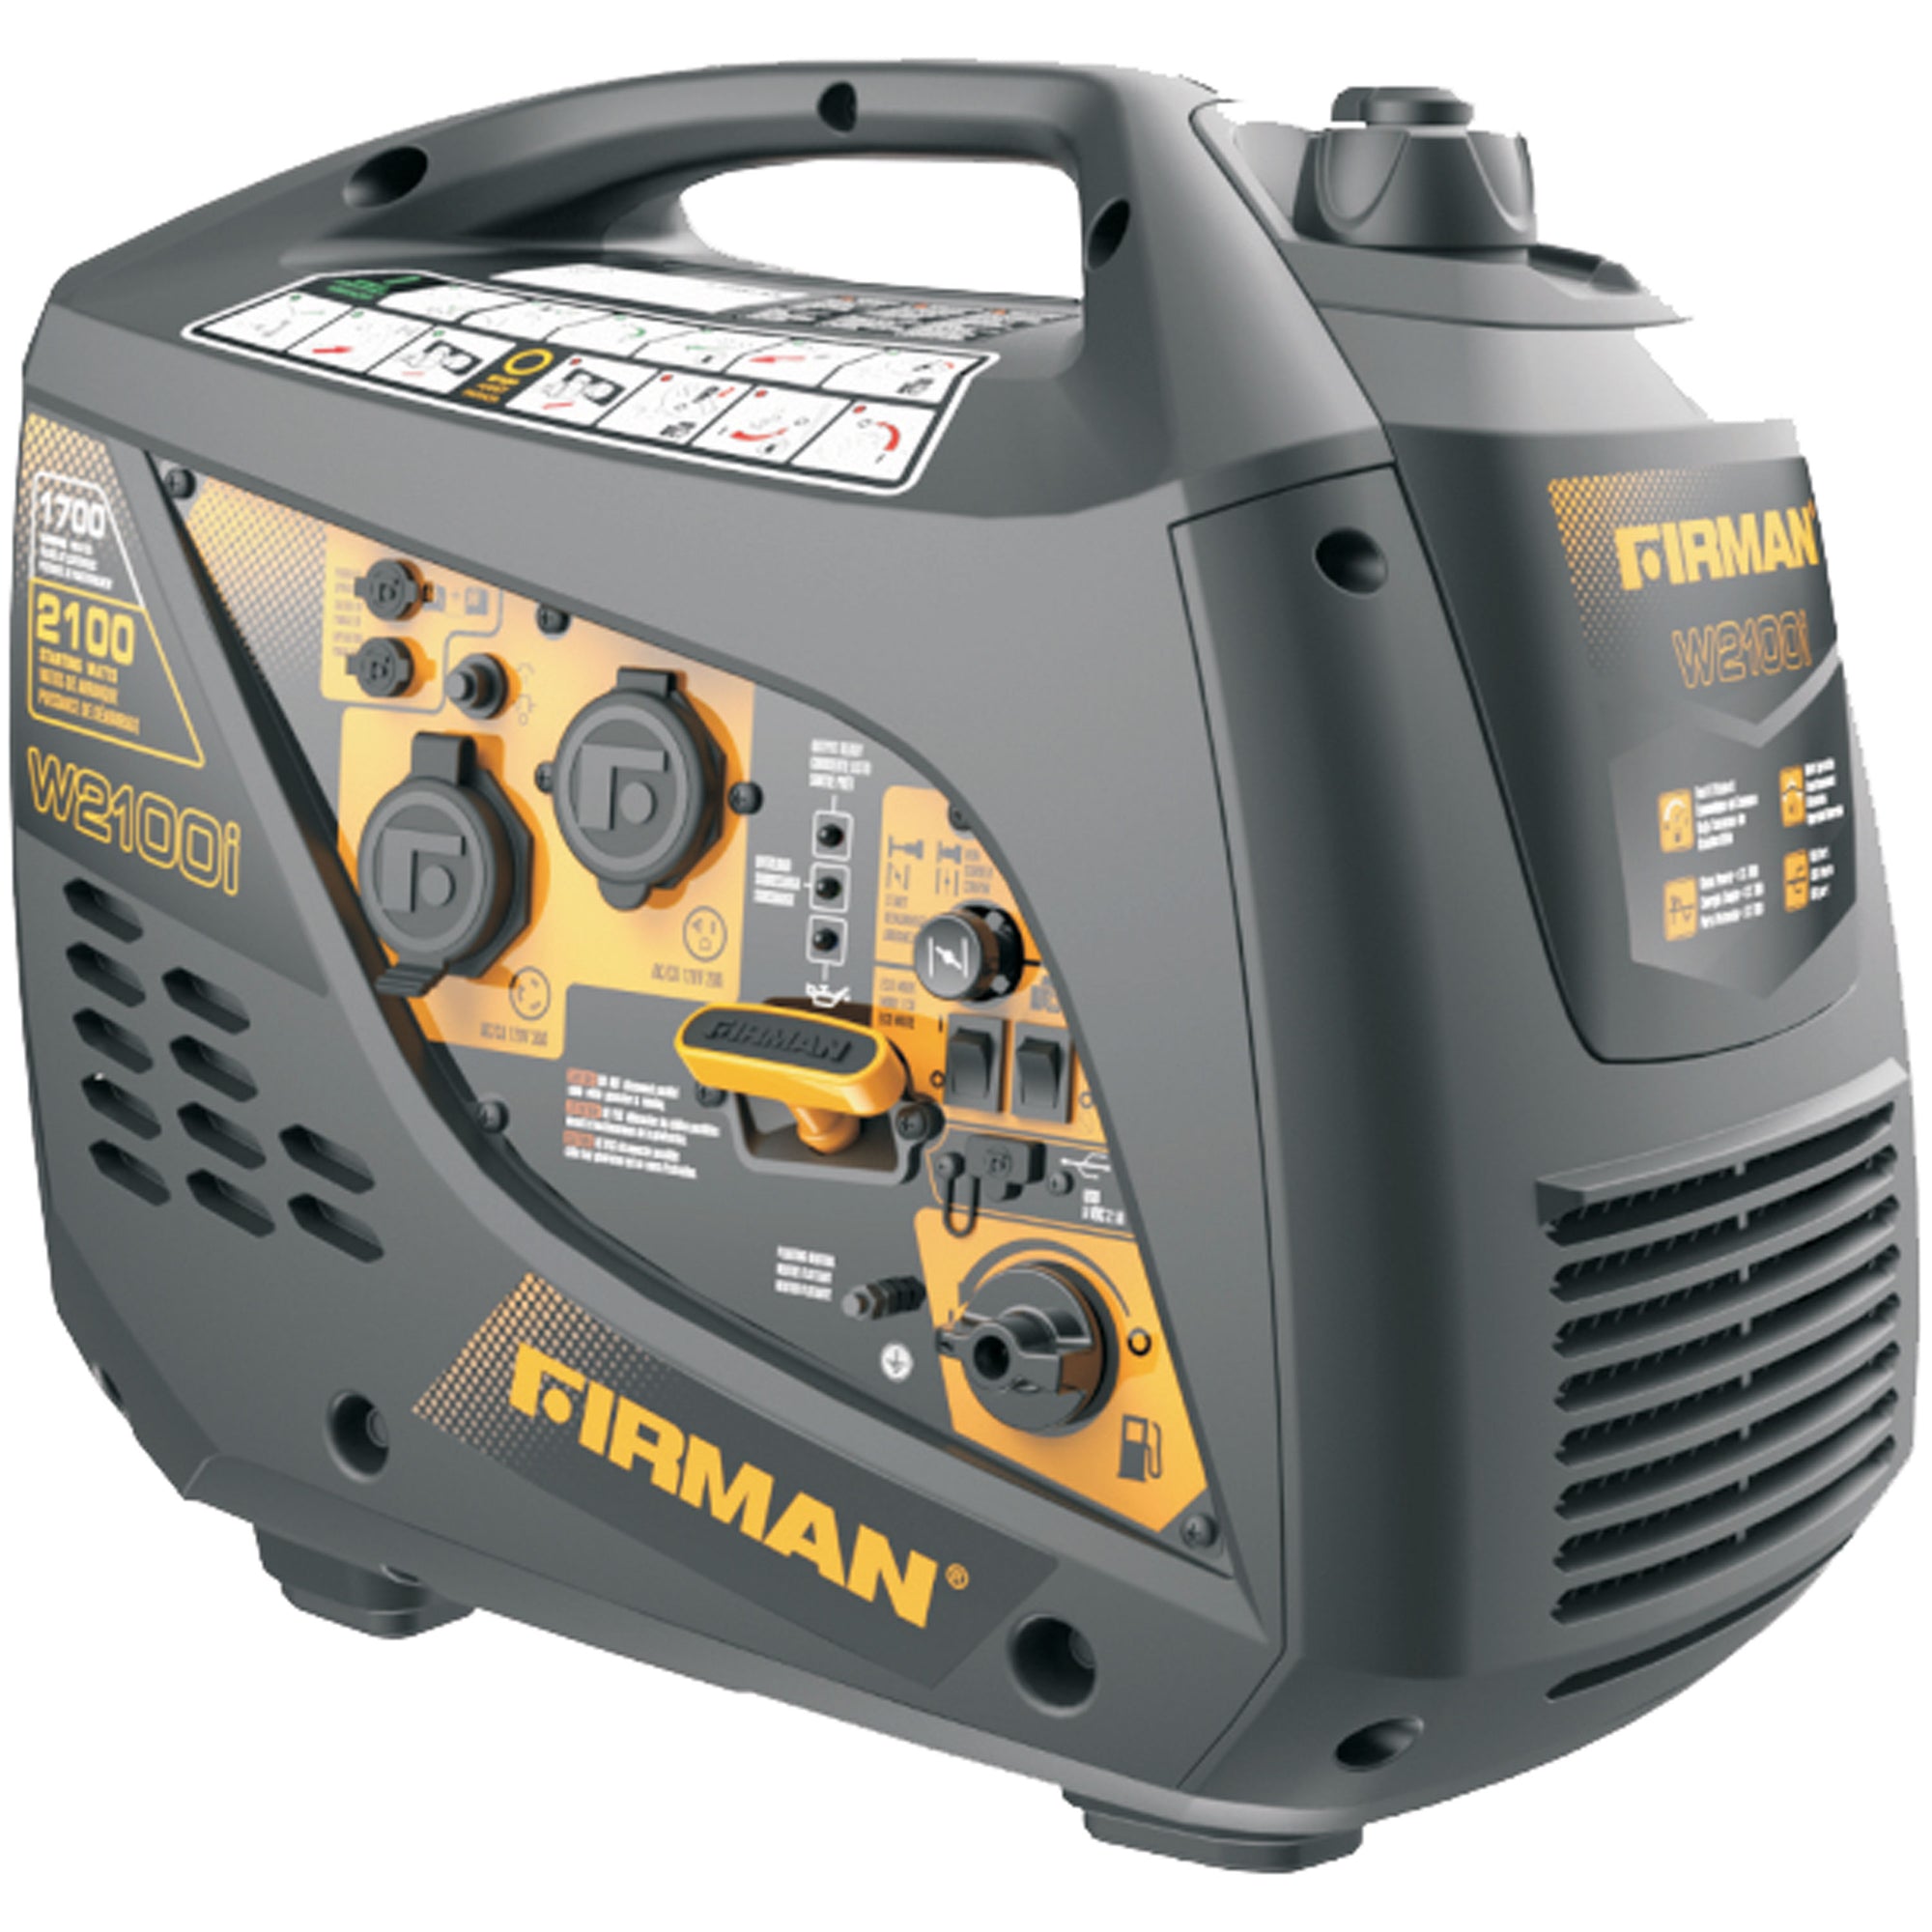 FIRMAN W01784 Portable Generator with Built-In Parallel Kit - 2100/1700W